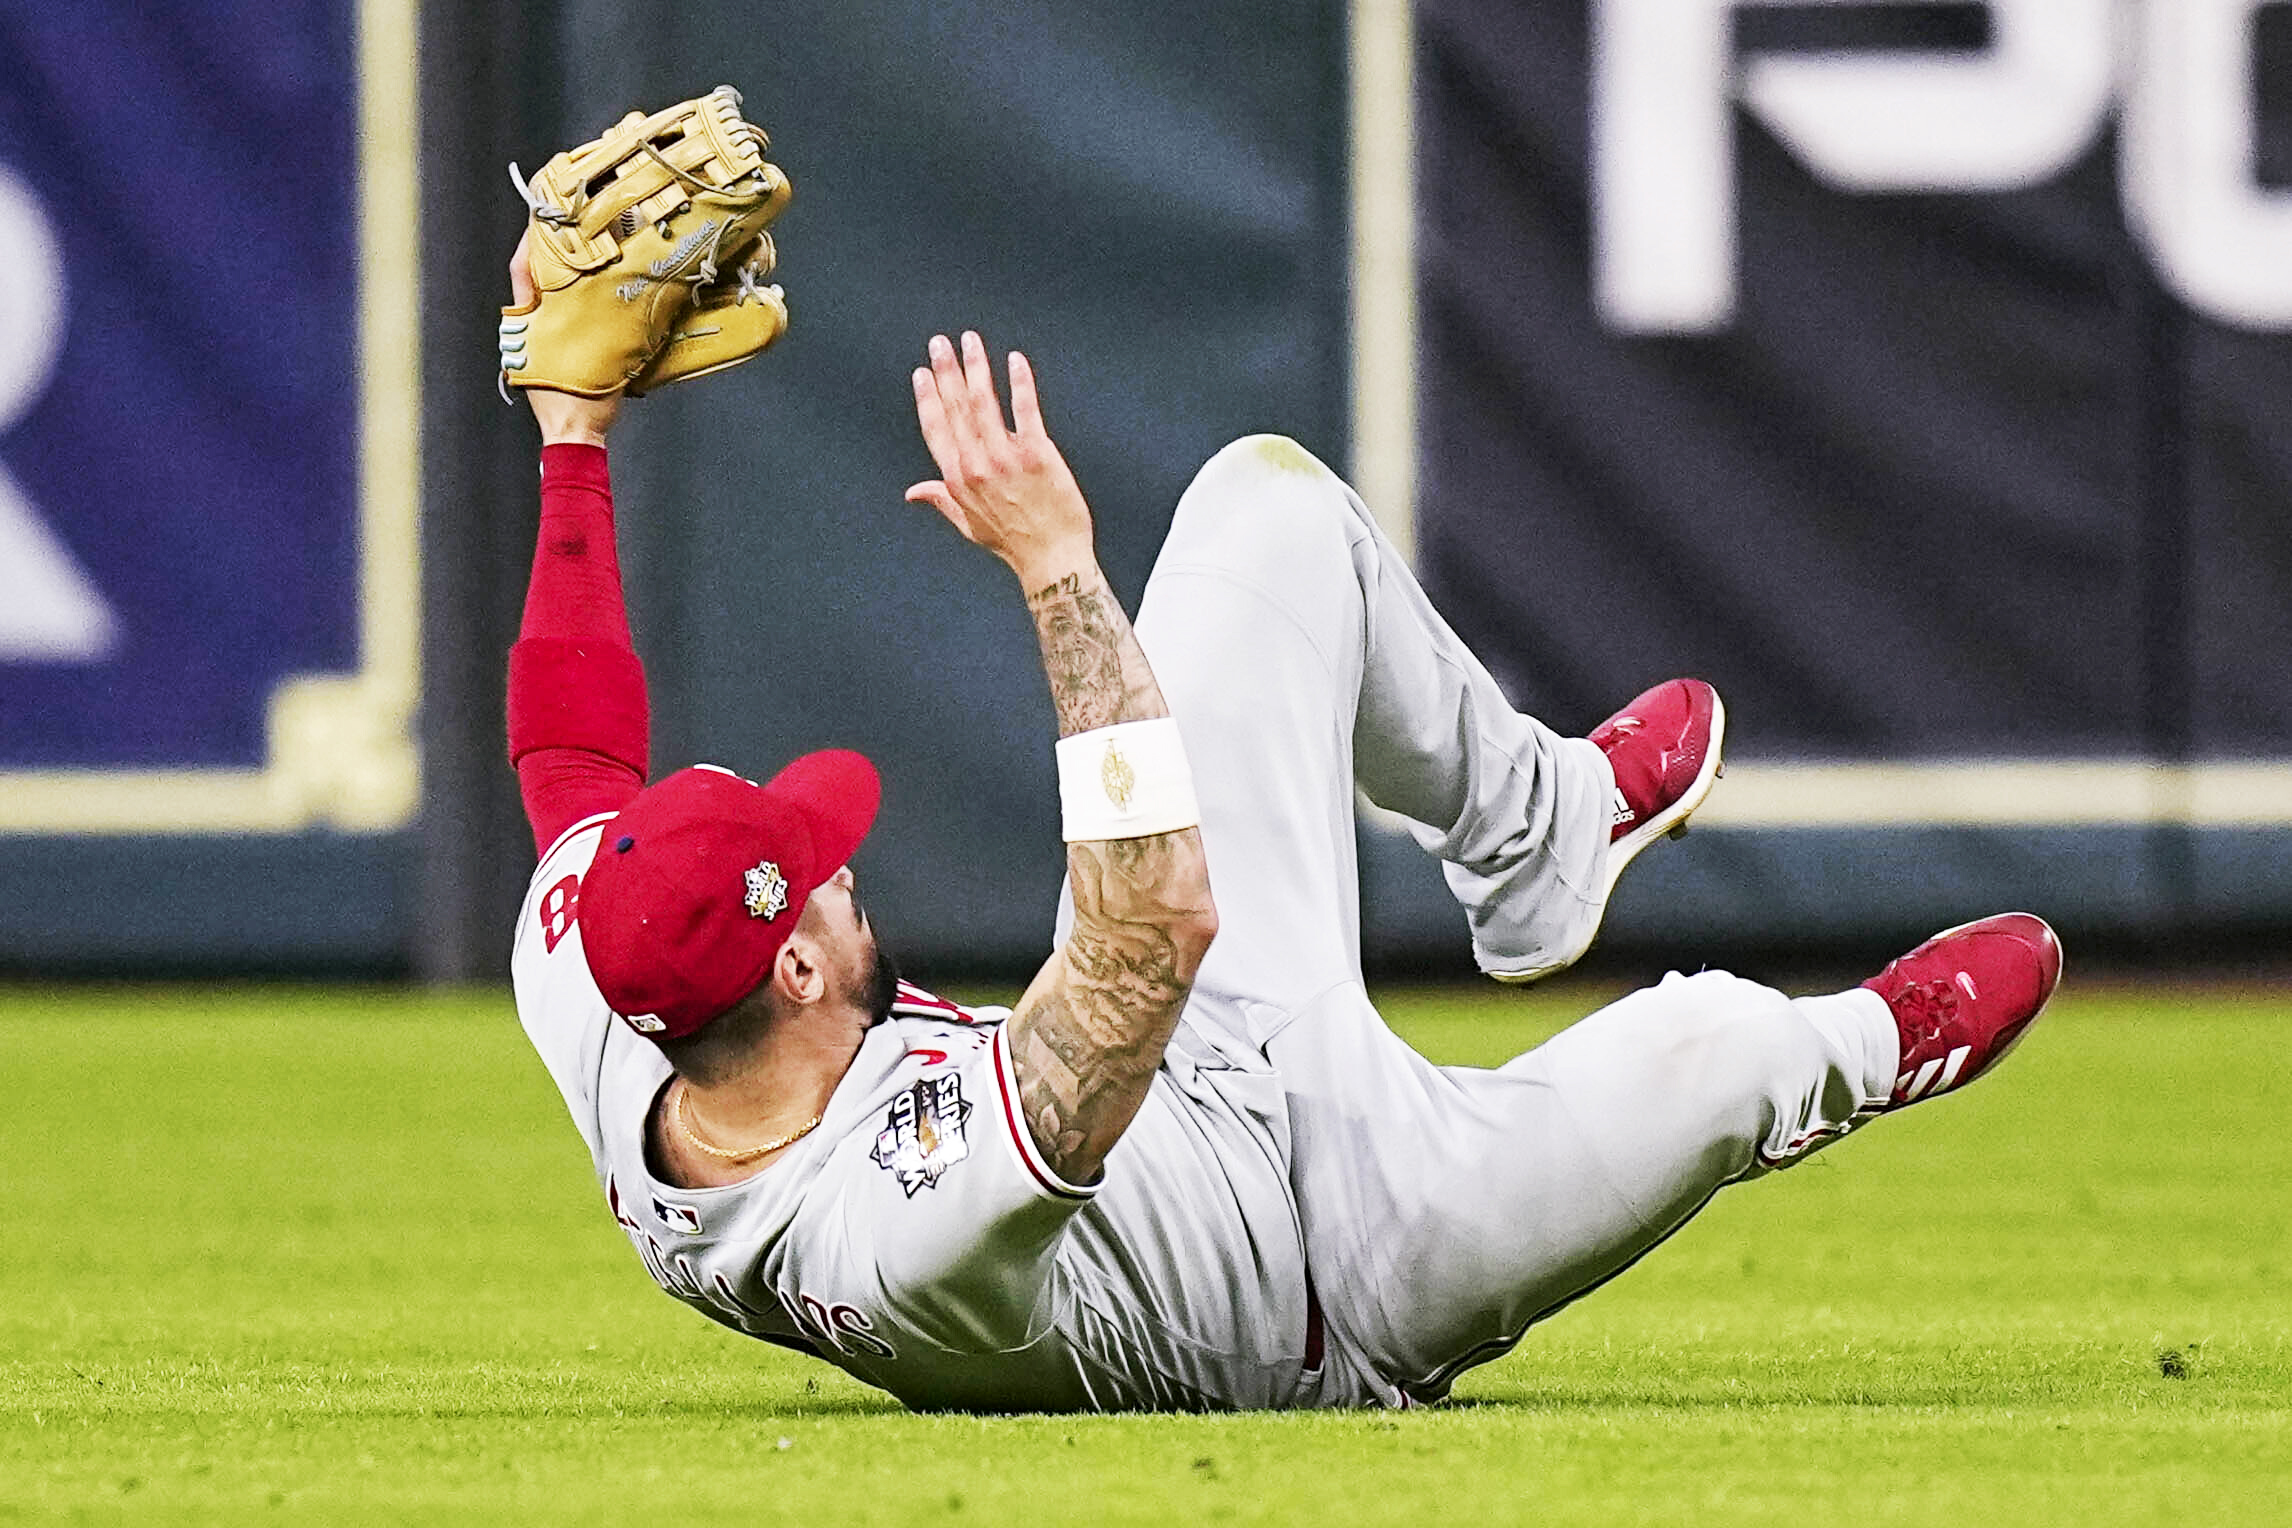 Phillies right fielder Nick Castellanos holds up his arms after making a game-saving sliding catch in Game 1 of the World Series vs. the Astros.